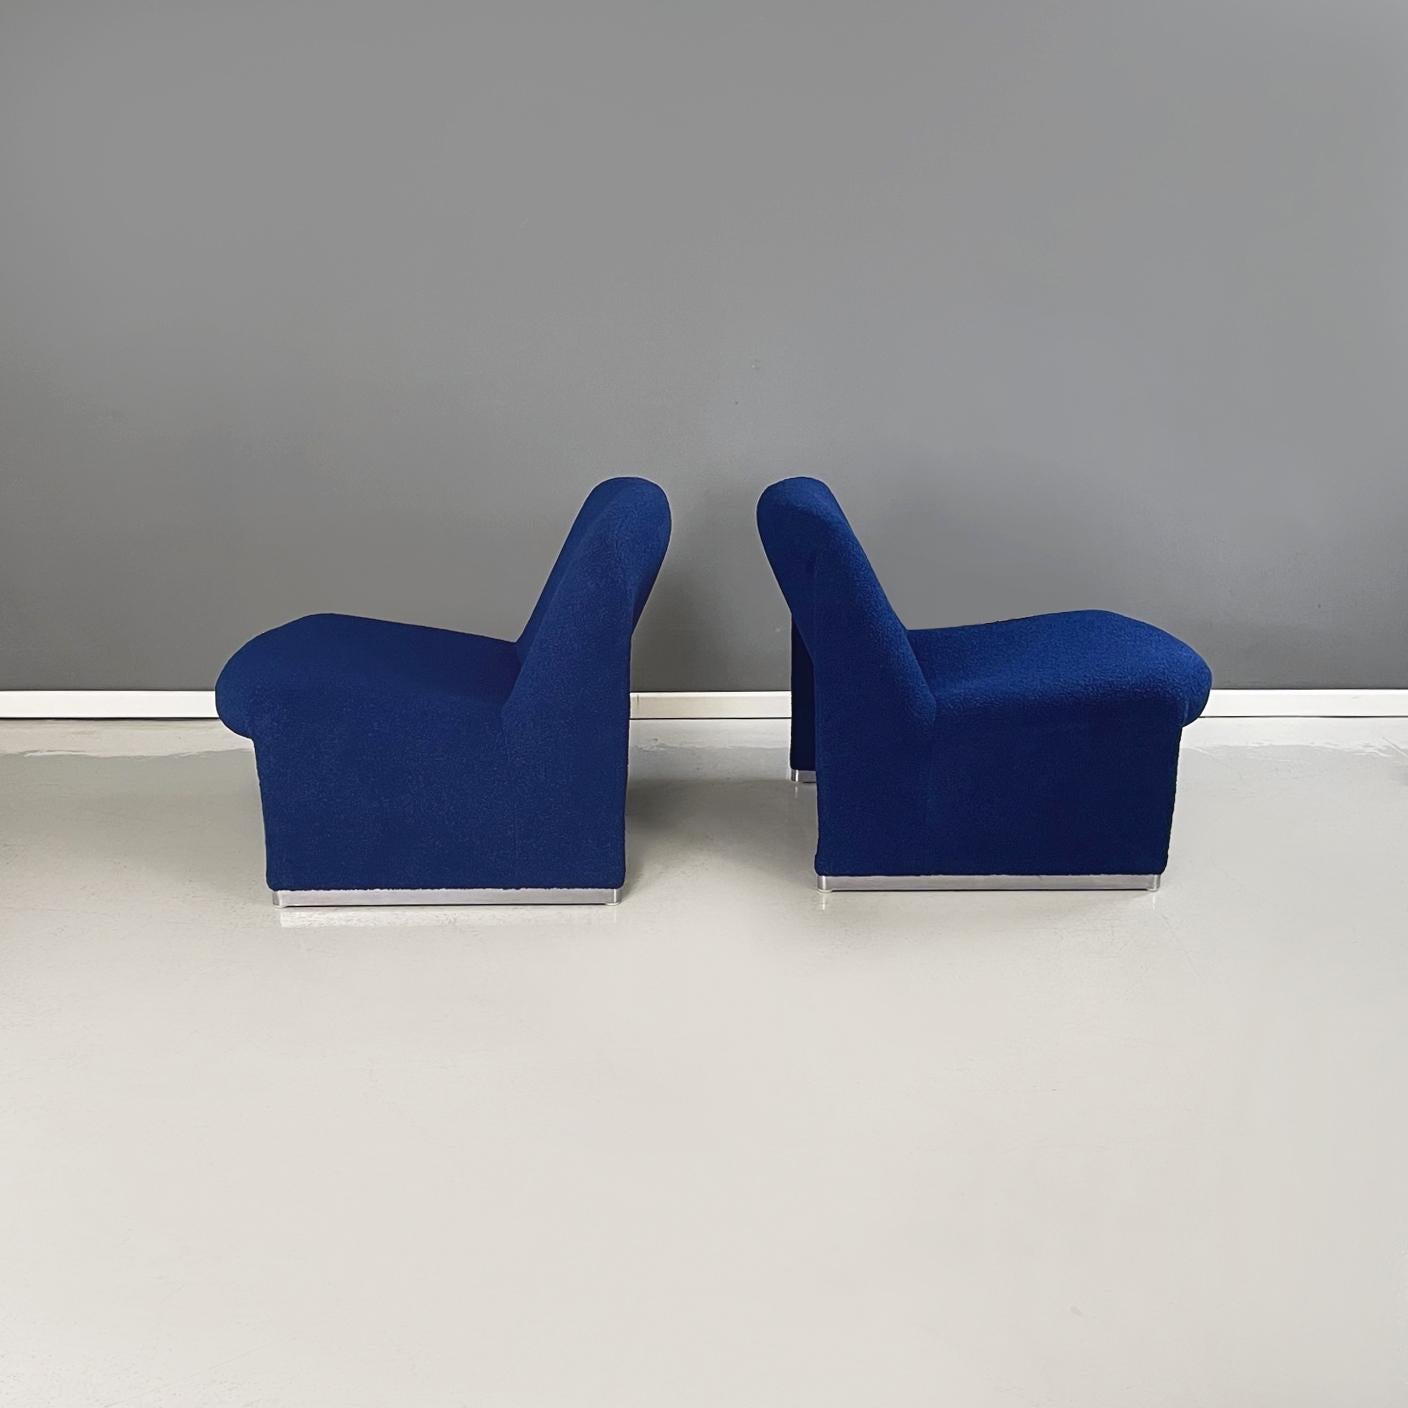 Italian modern Blue fabric Armchairs Alky by Piretti for Anonima Castelli, 1970s In Good Condition For Sale In MIlano, IT